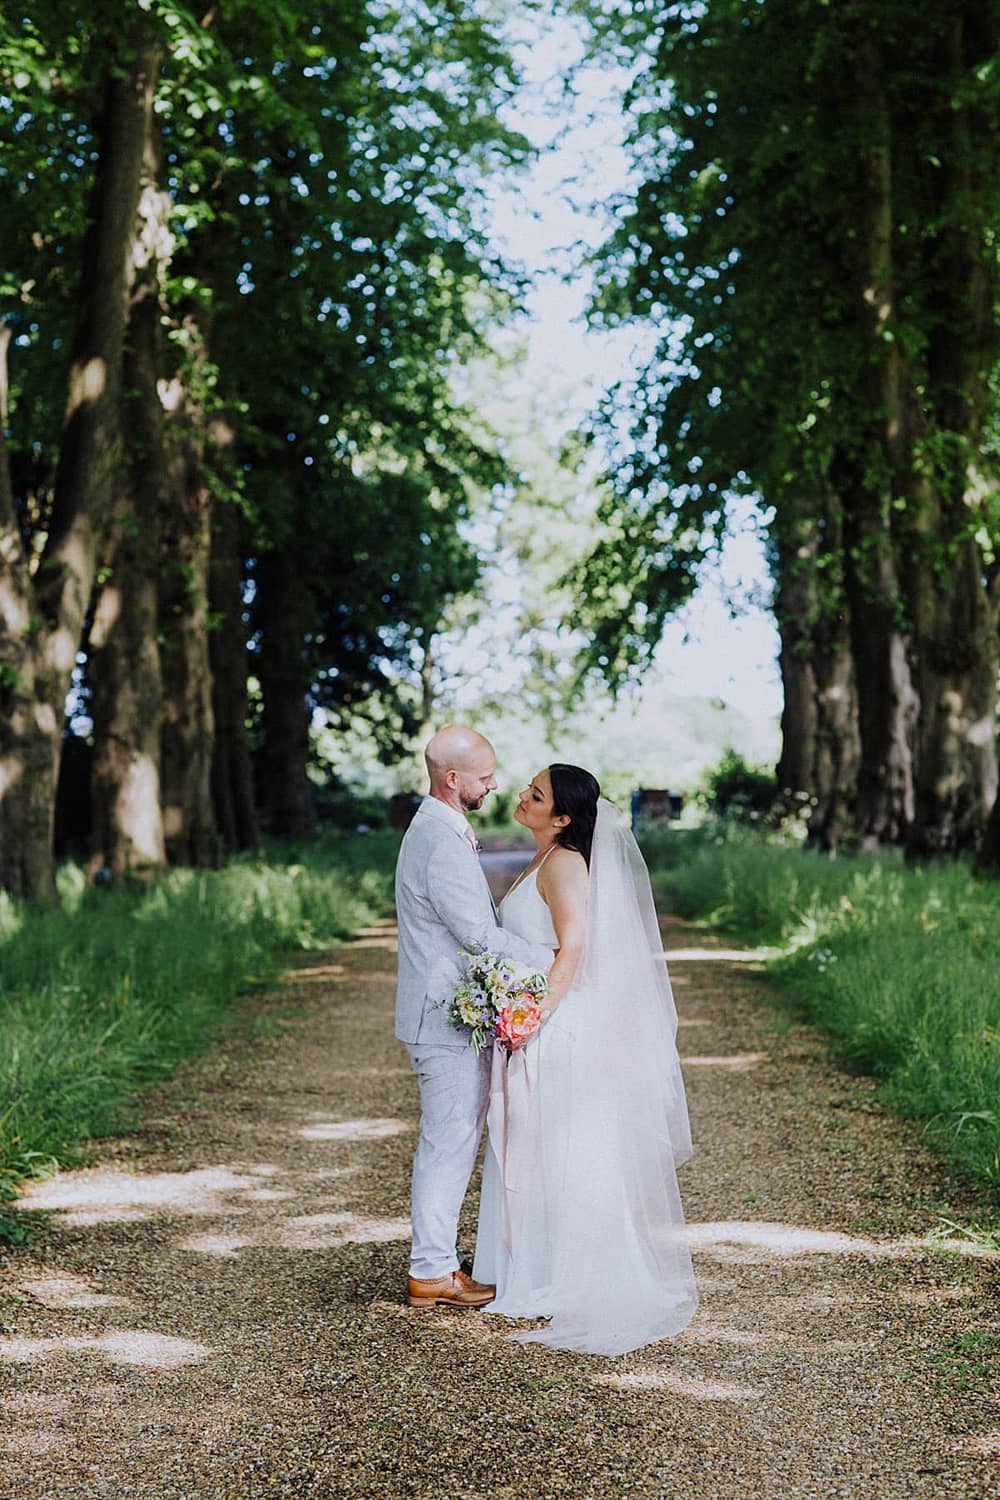 Dusty Pink & Coral Wedding Inspiration at Swanton Morley House